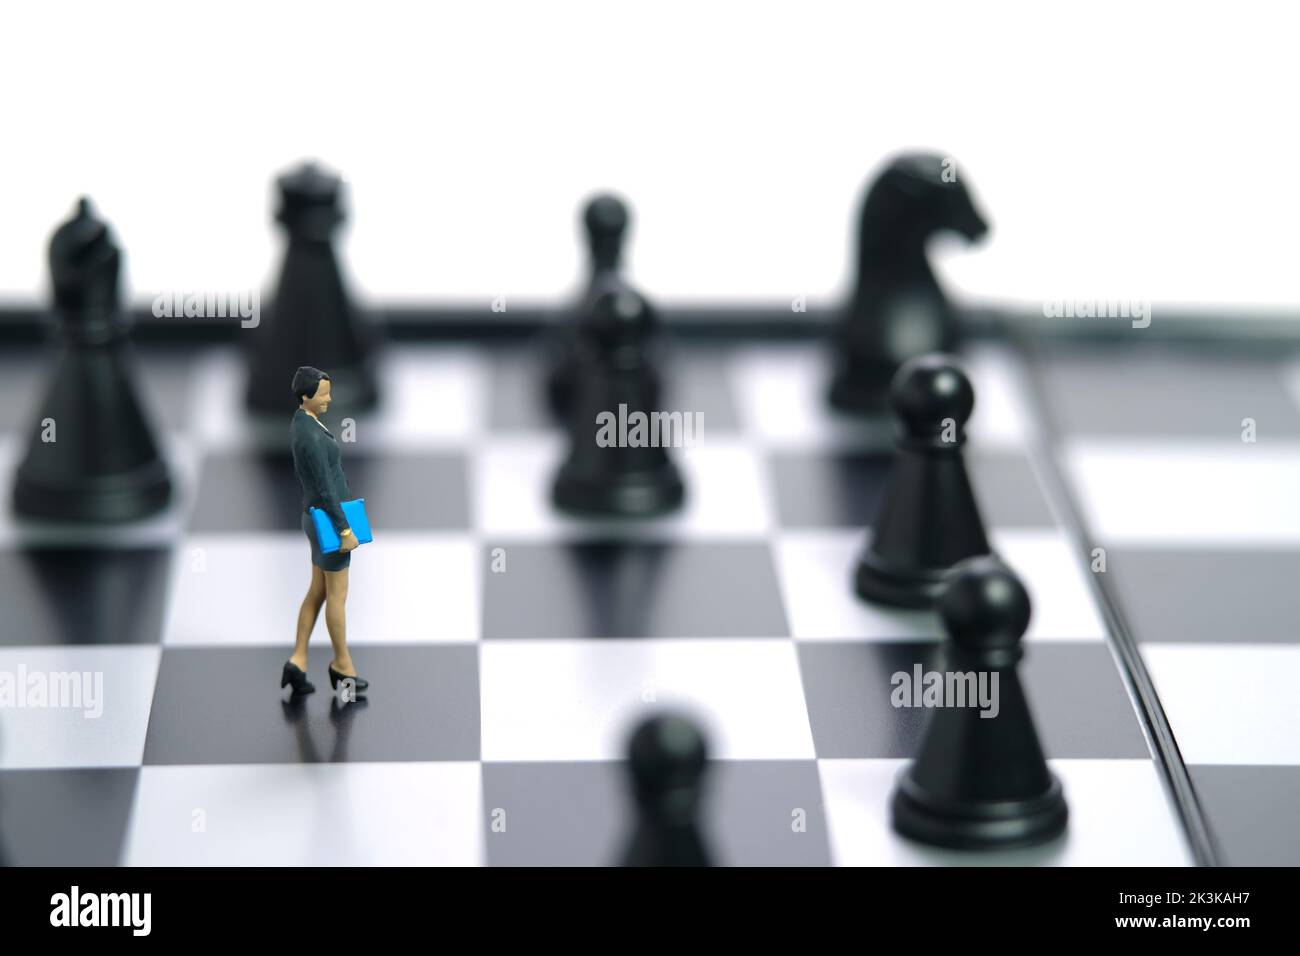 Miniature people toy figure photography. A businesswoman walking above chessboard in the middle of chess piece. Isolated on white background. Image ph Stock Photo